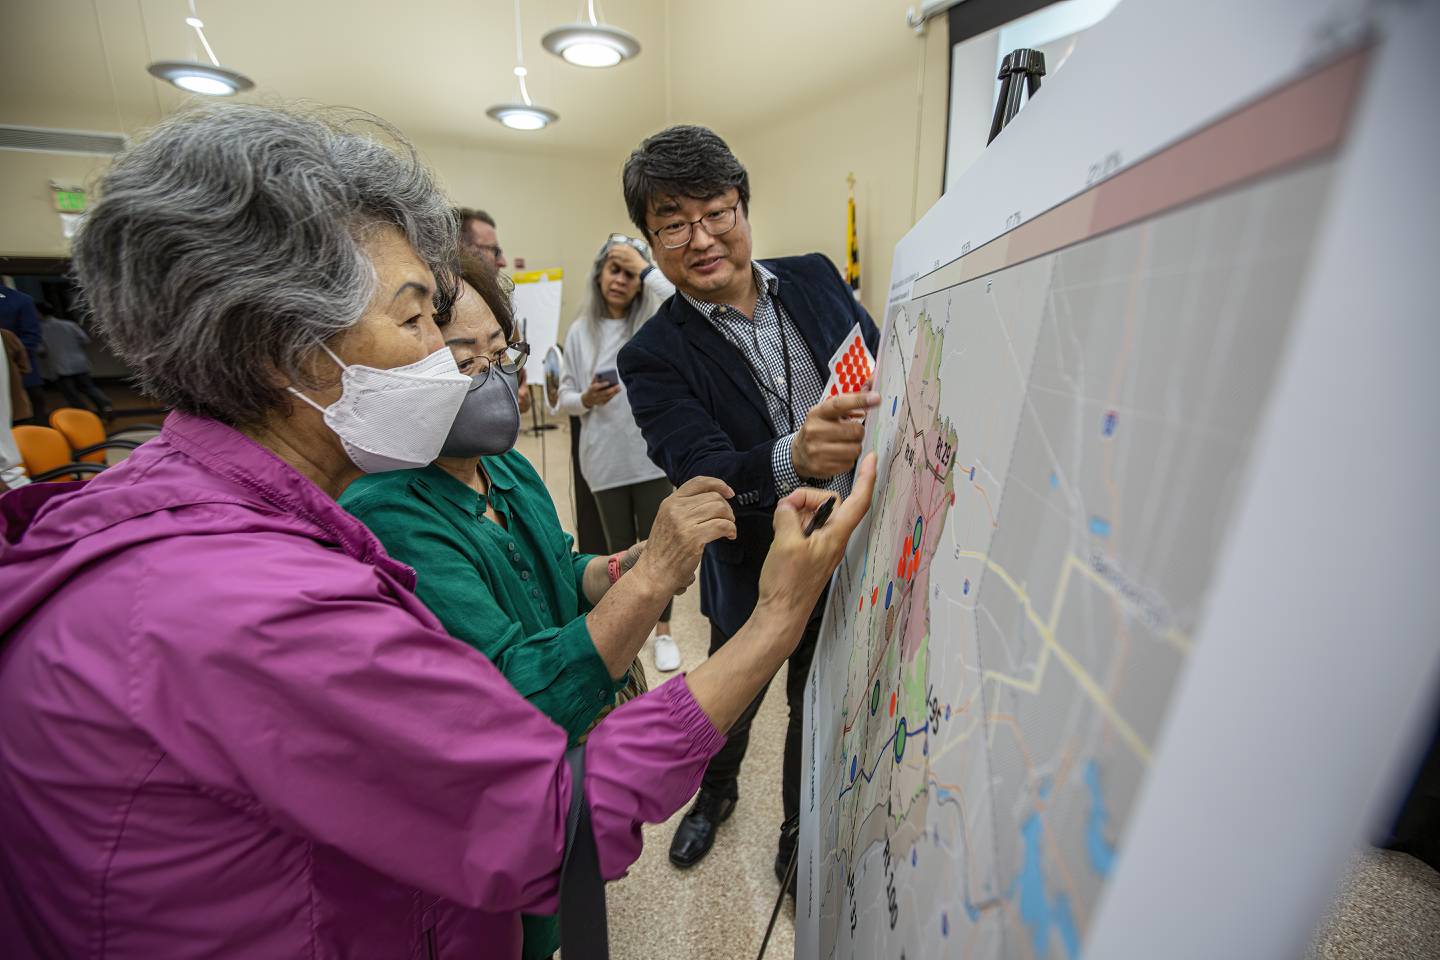 In the foreground, an Asian woman with grey hair looks at a map on a display stand.